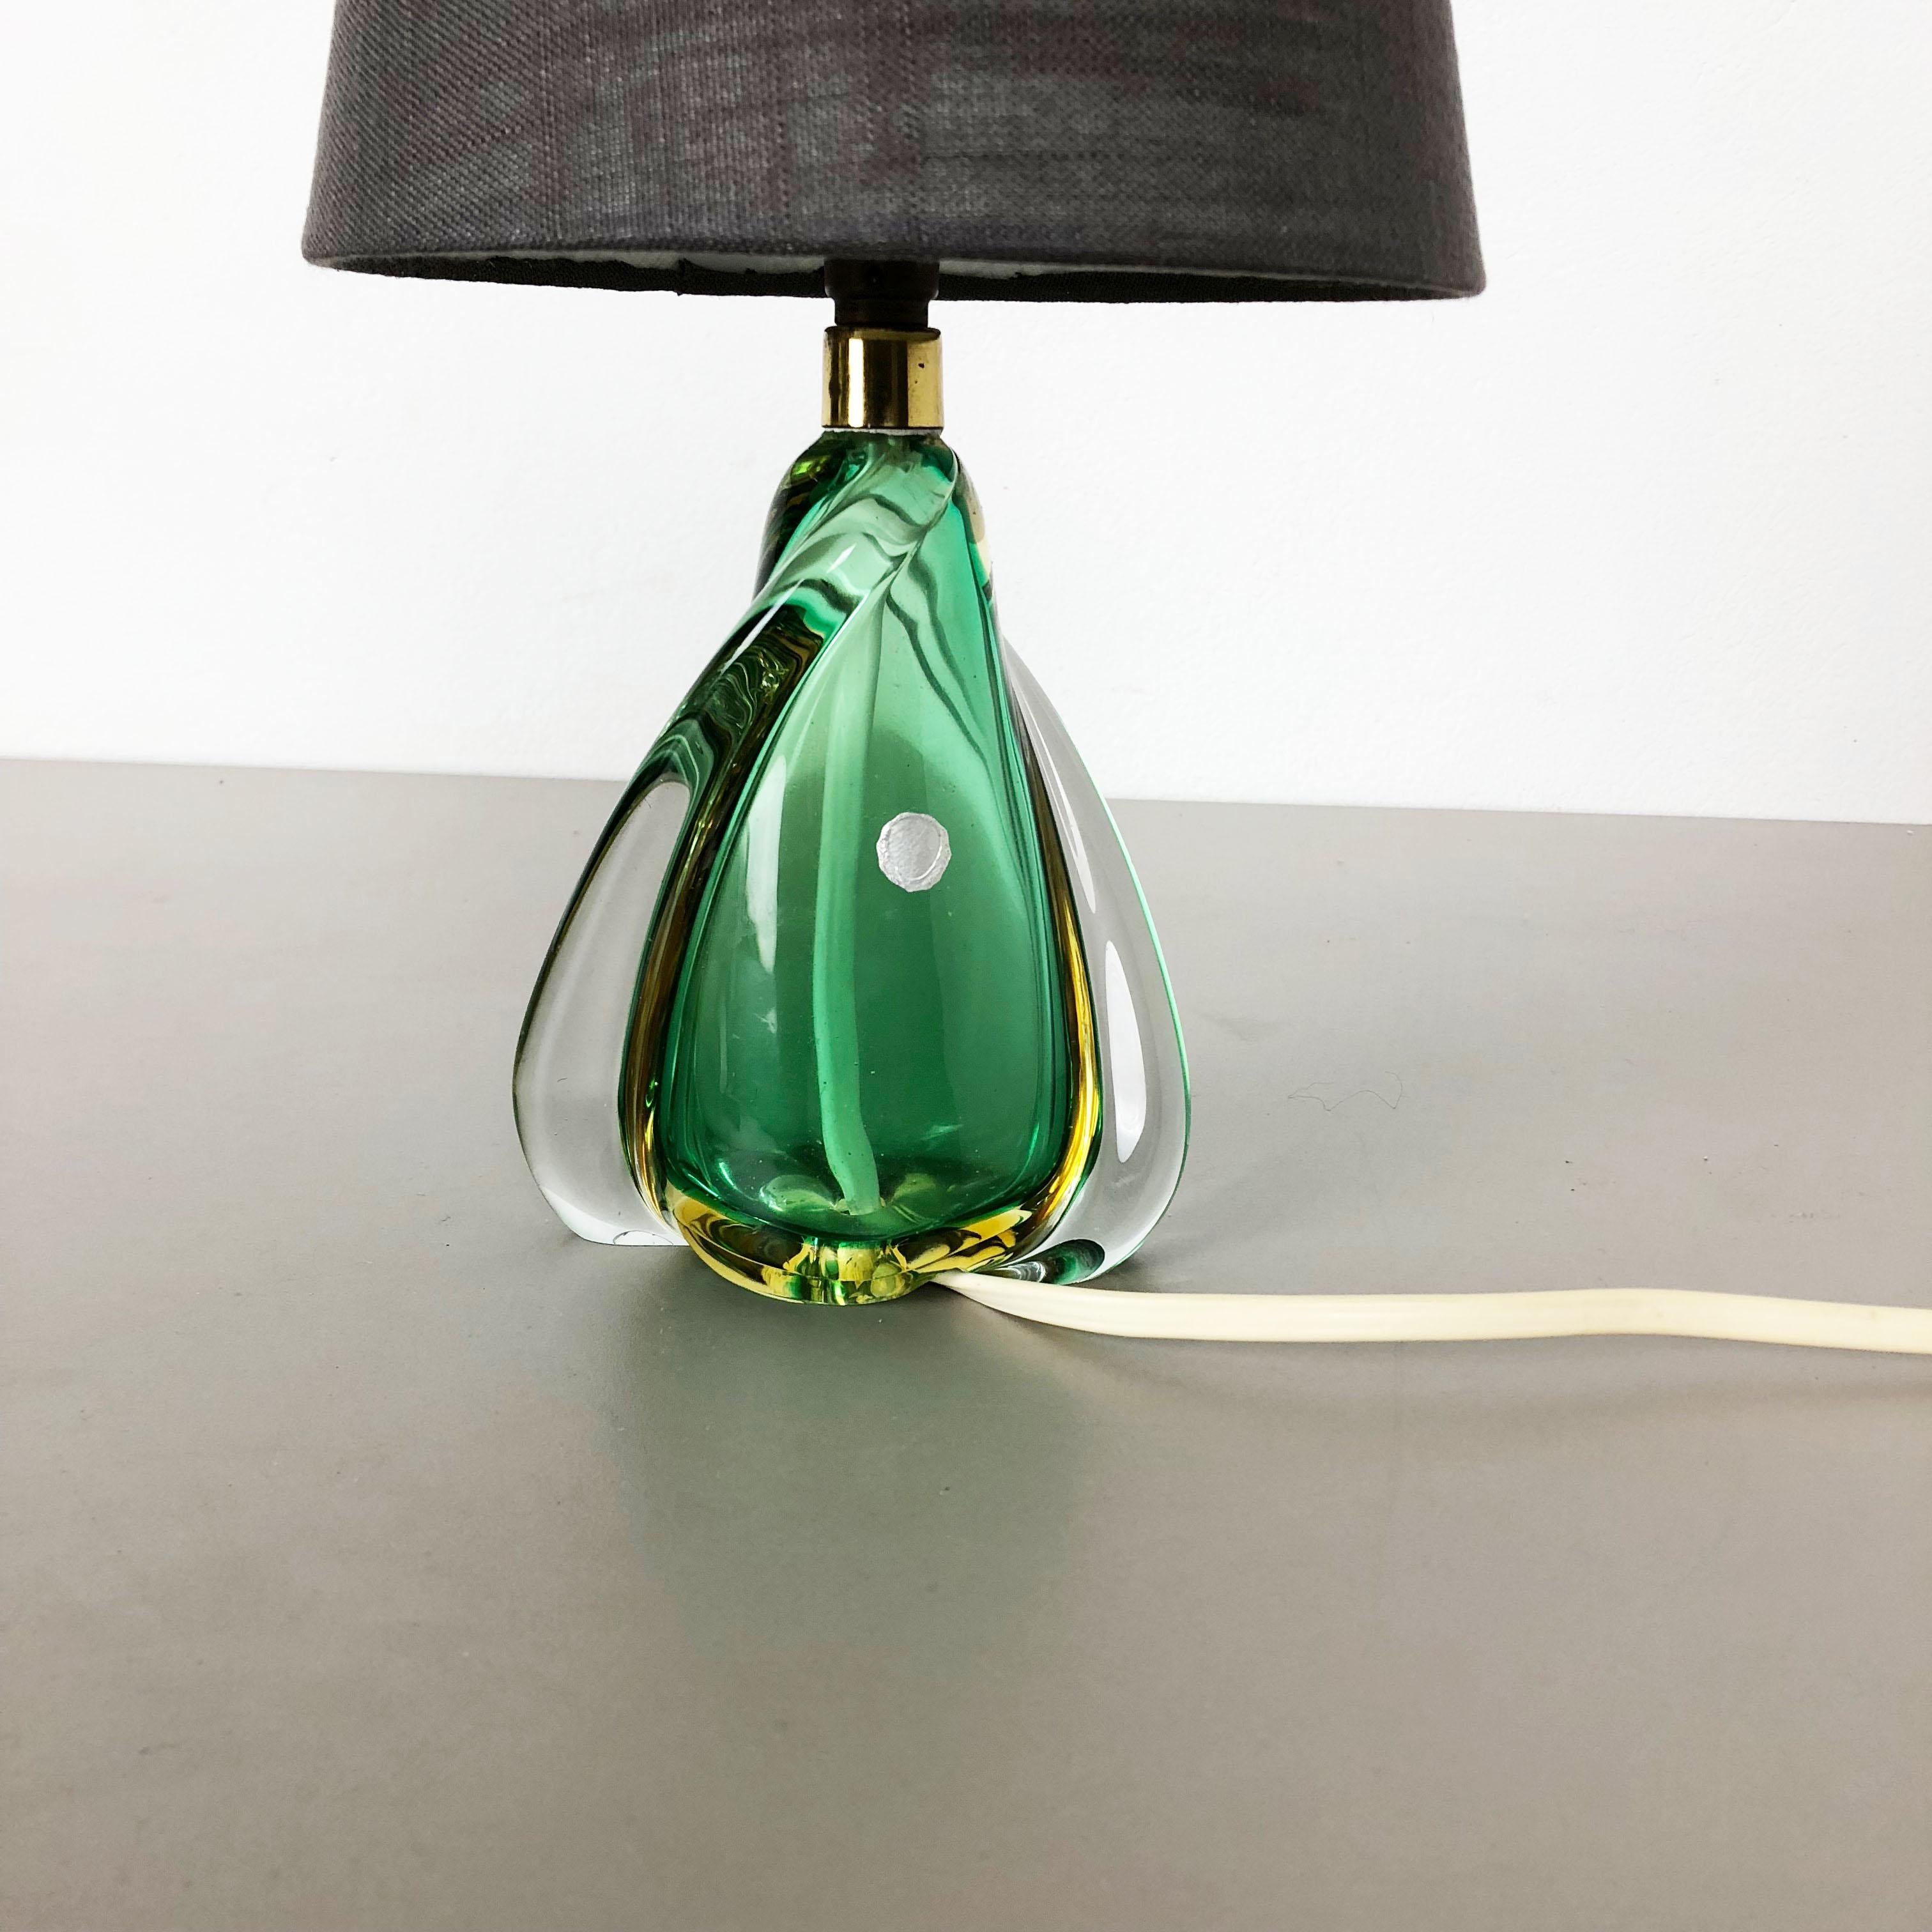 Article:

table light desk top light


Origina:

Murano, Italy


Age:

1960s




Description:


This fantastic vintage table light base was designed and produced in the 1960s in Murano, Italy. The light base is made of high